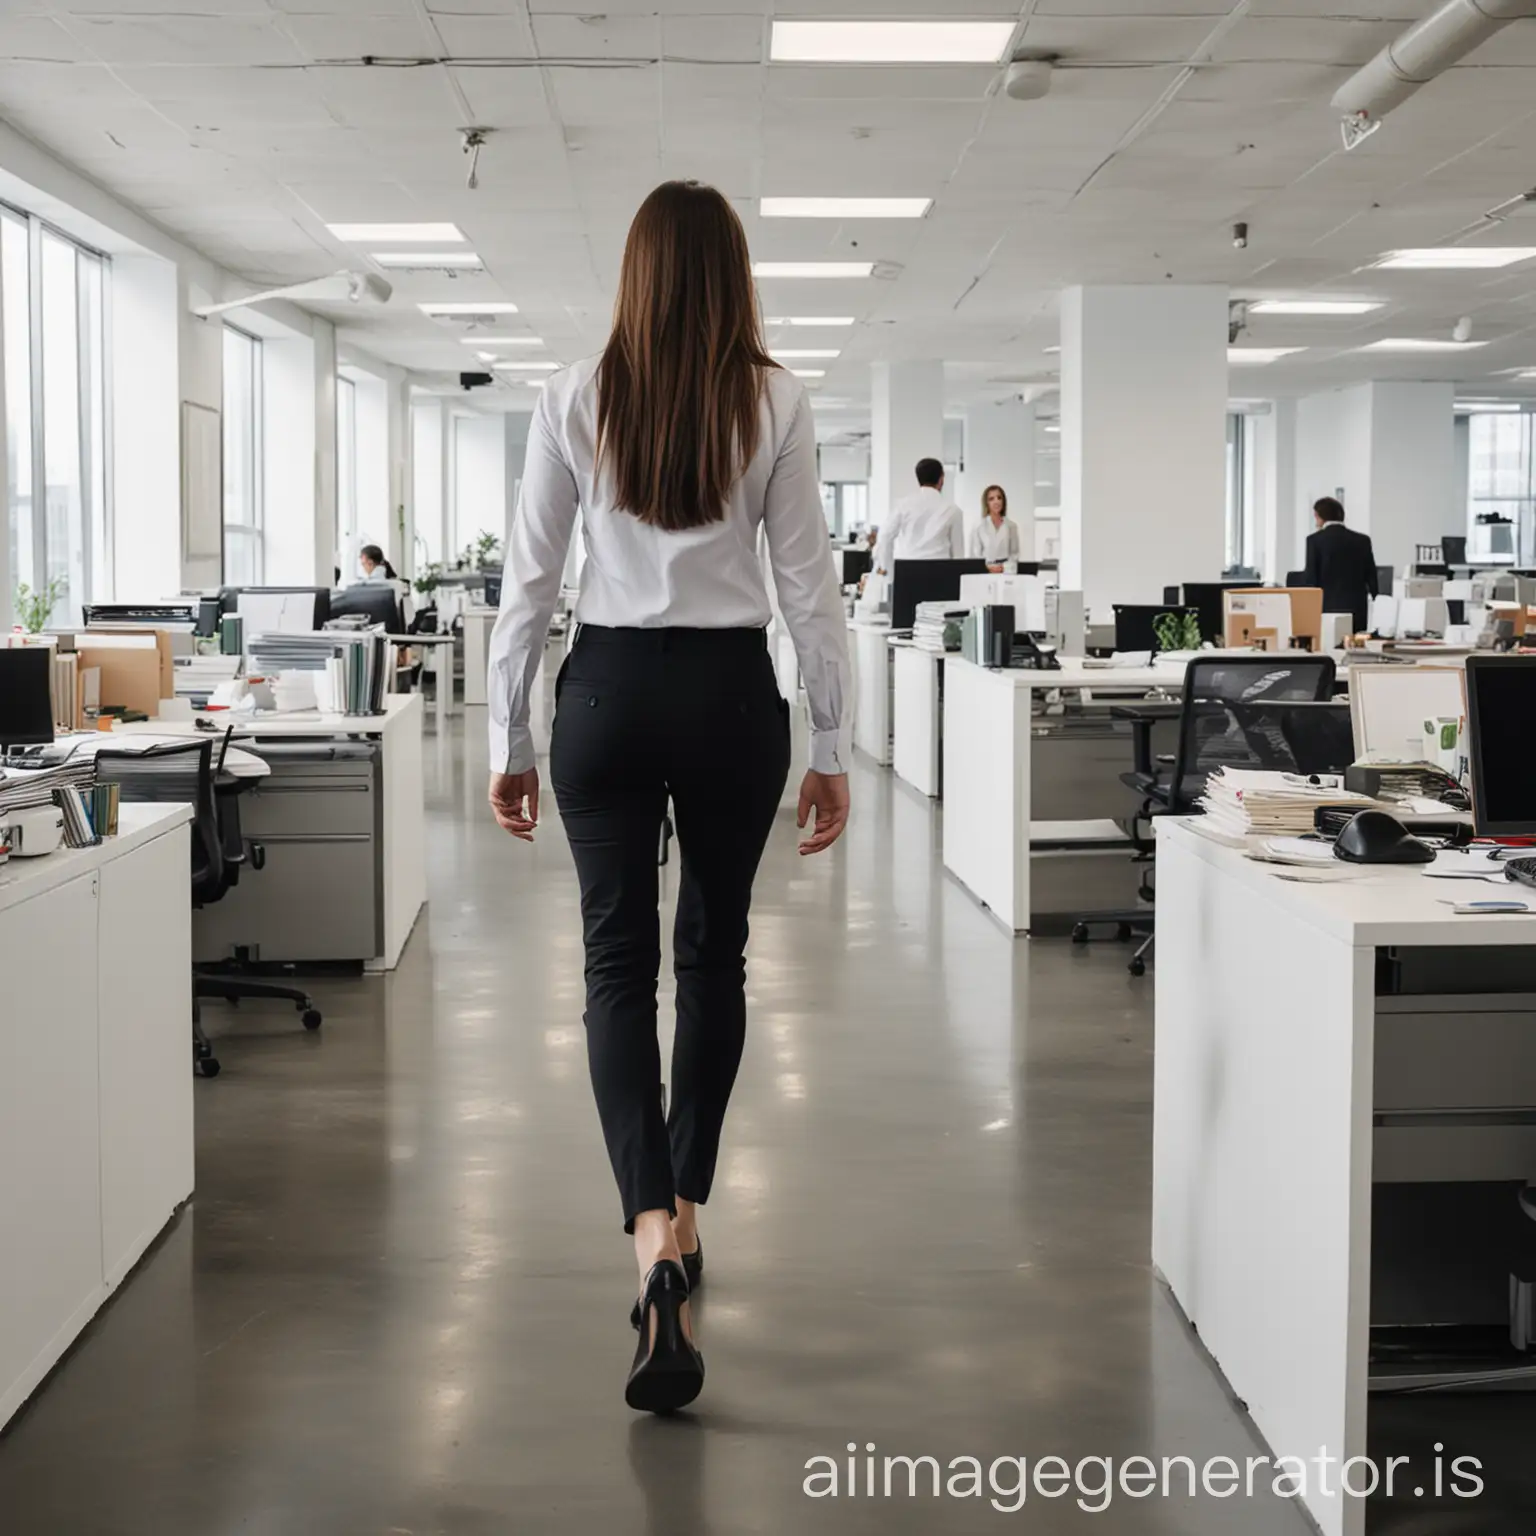 Professional-Woman-Walking-Towards-Chaotic-Office-Environment